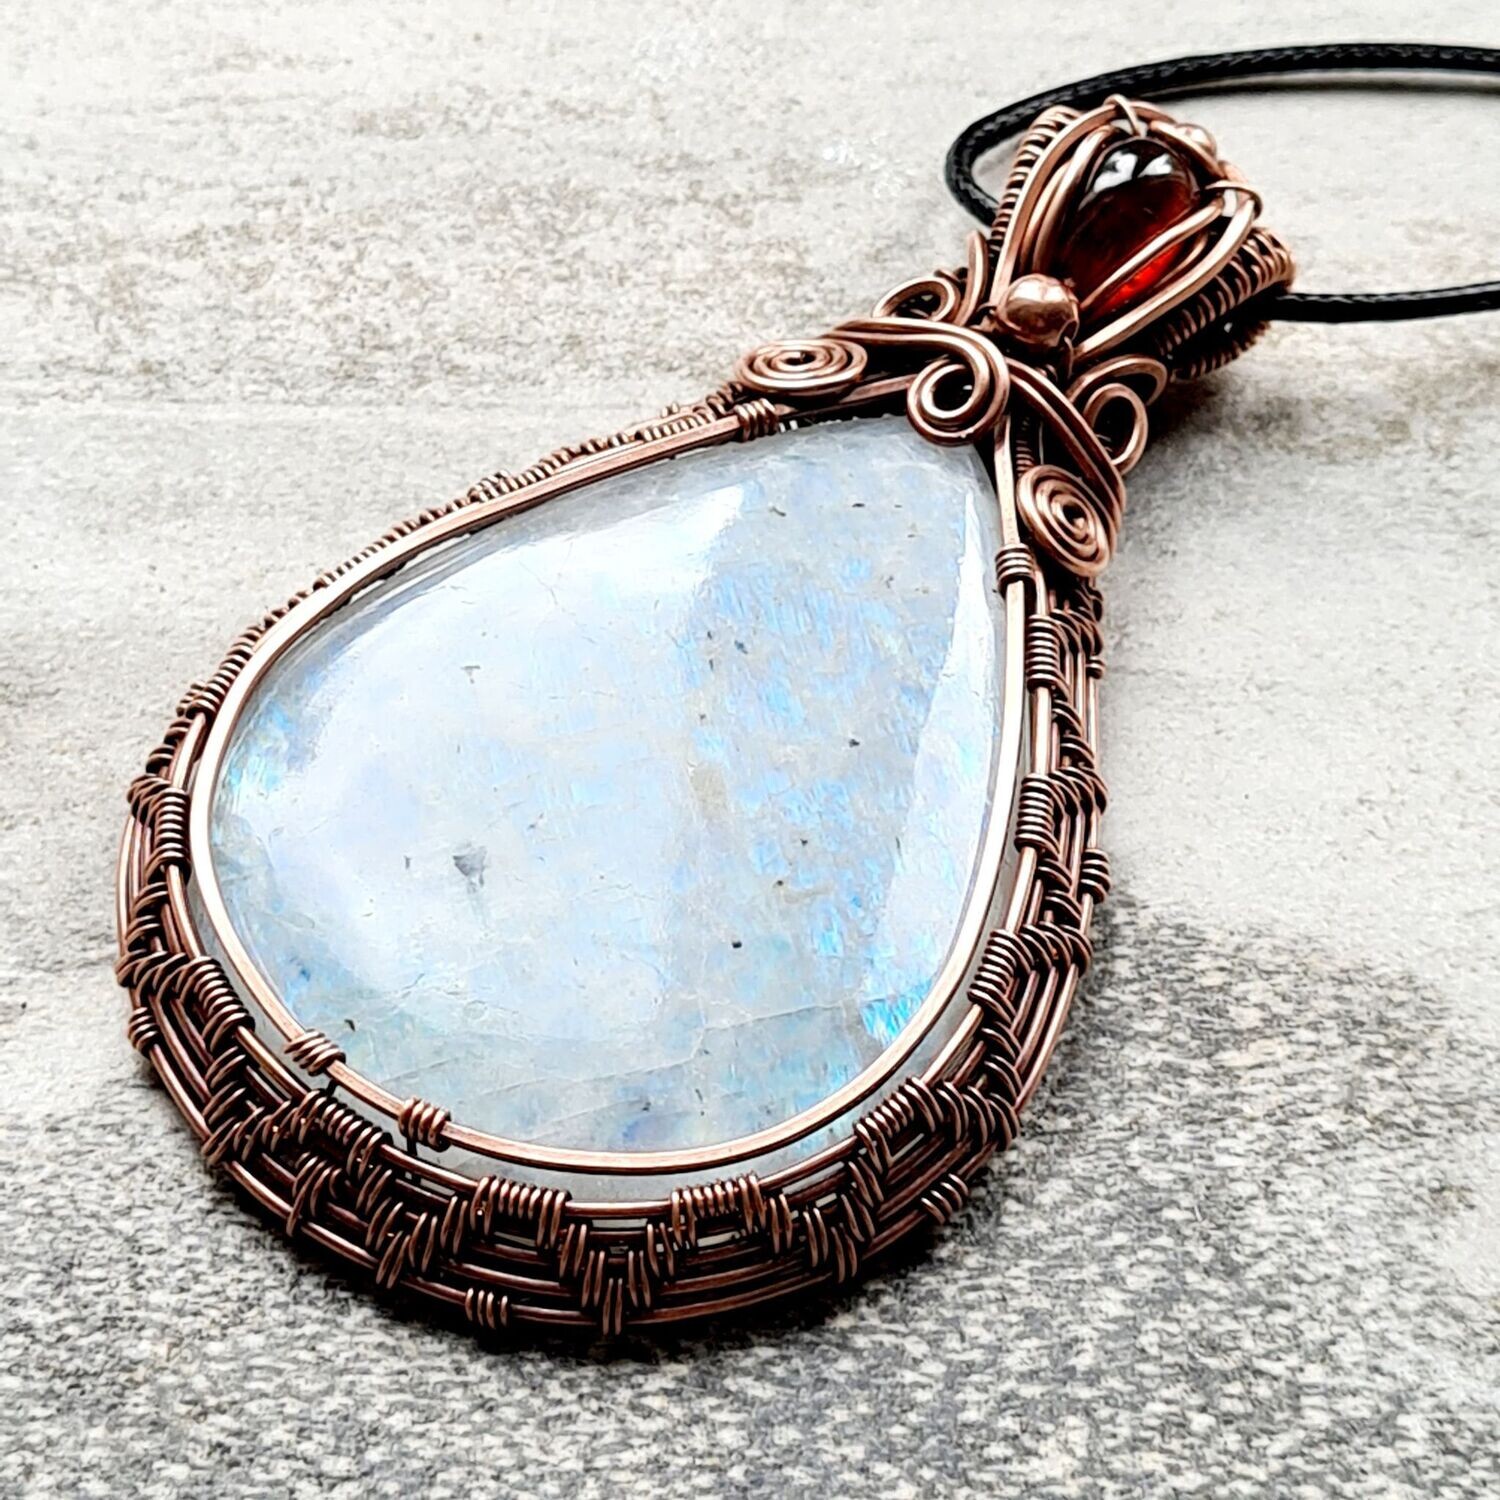 Behemoth Rainbow Moonstone with Garnet accents and beads pendant with chain.